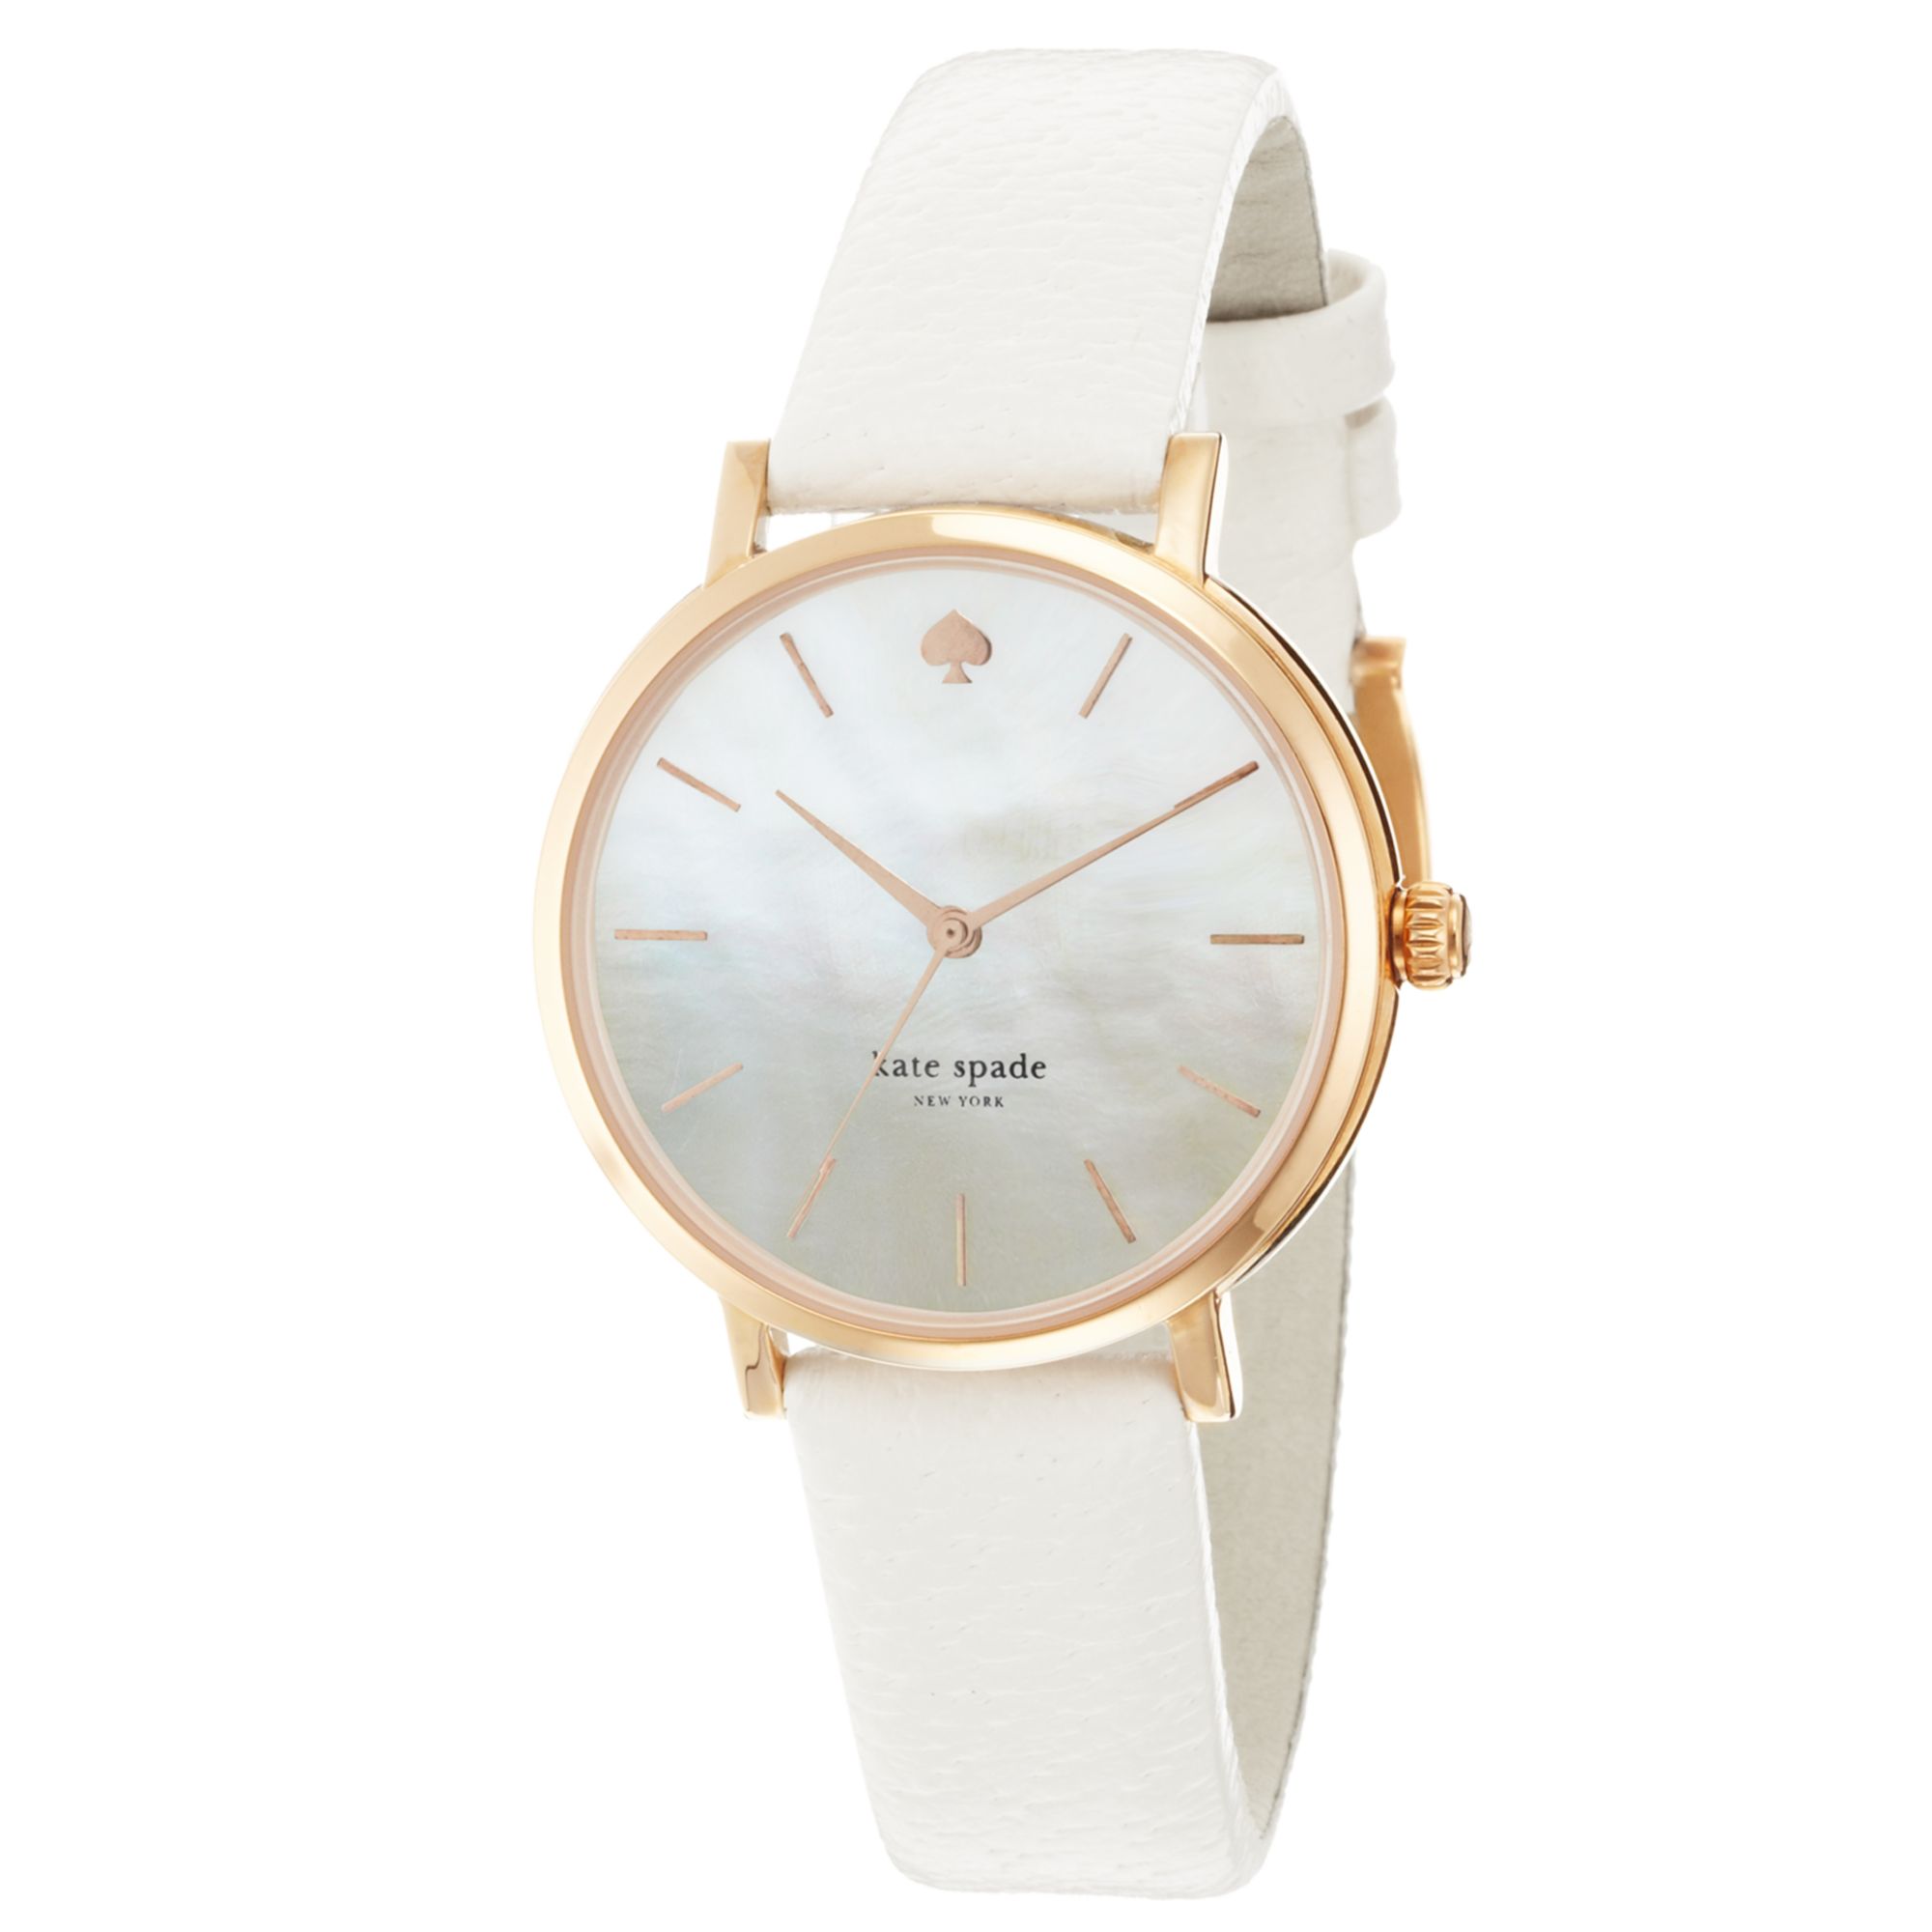 Kate Spade New York Womens Metro Classic White Leather Strap Watch 34mm